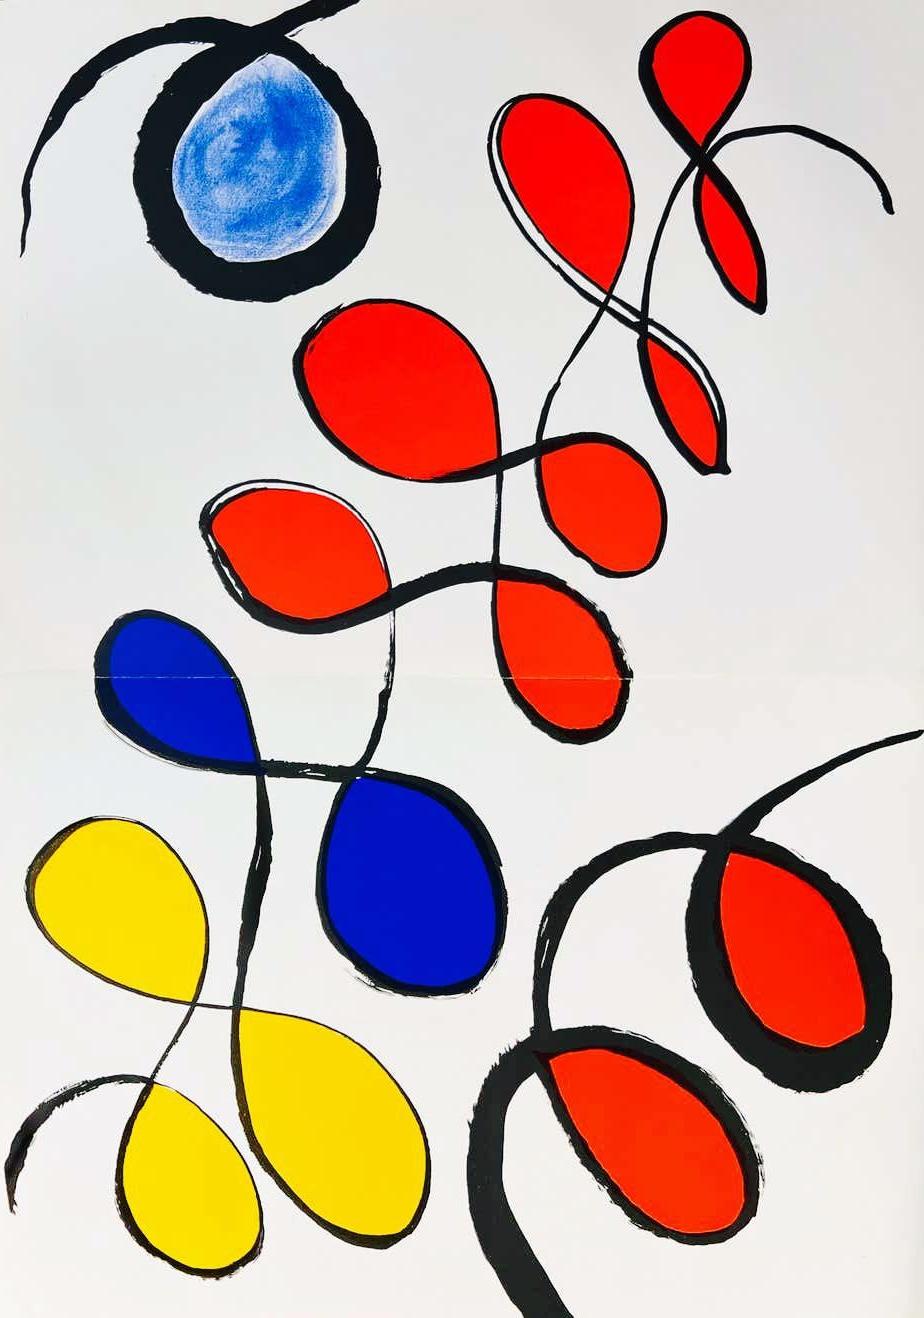 Alexander Calder Lithograph c. 1967 from Derrière le miroir:

Lithograph in colors; 15 x 22 inches.
Very good overall vintage condition; contains center fold-line as originally issued; well-preseved. 
Unsigned from an edition of unknown.
From: